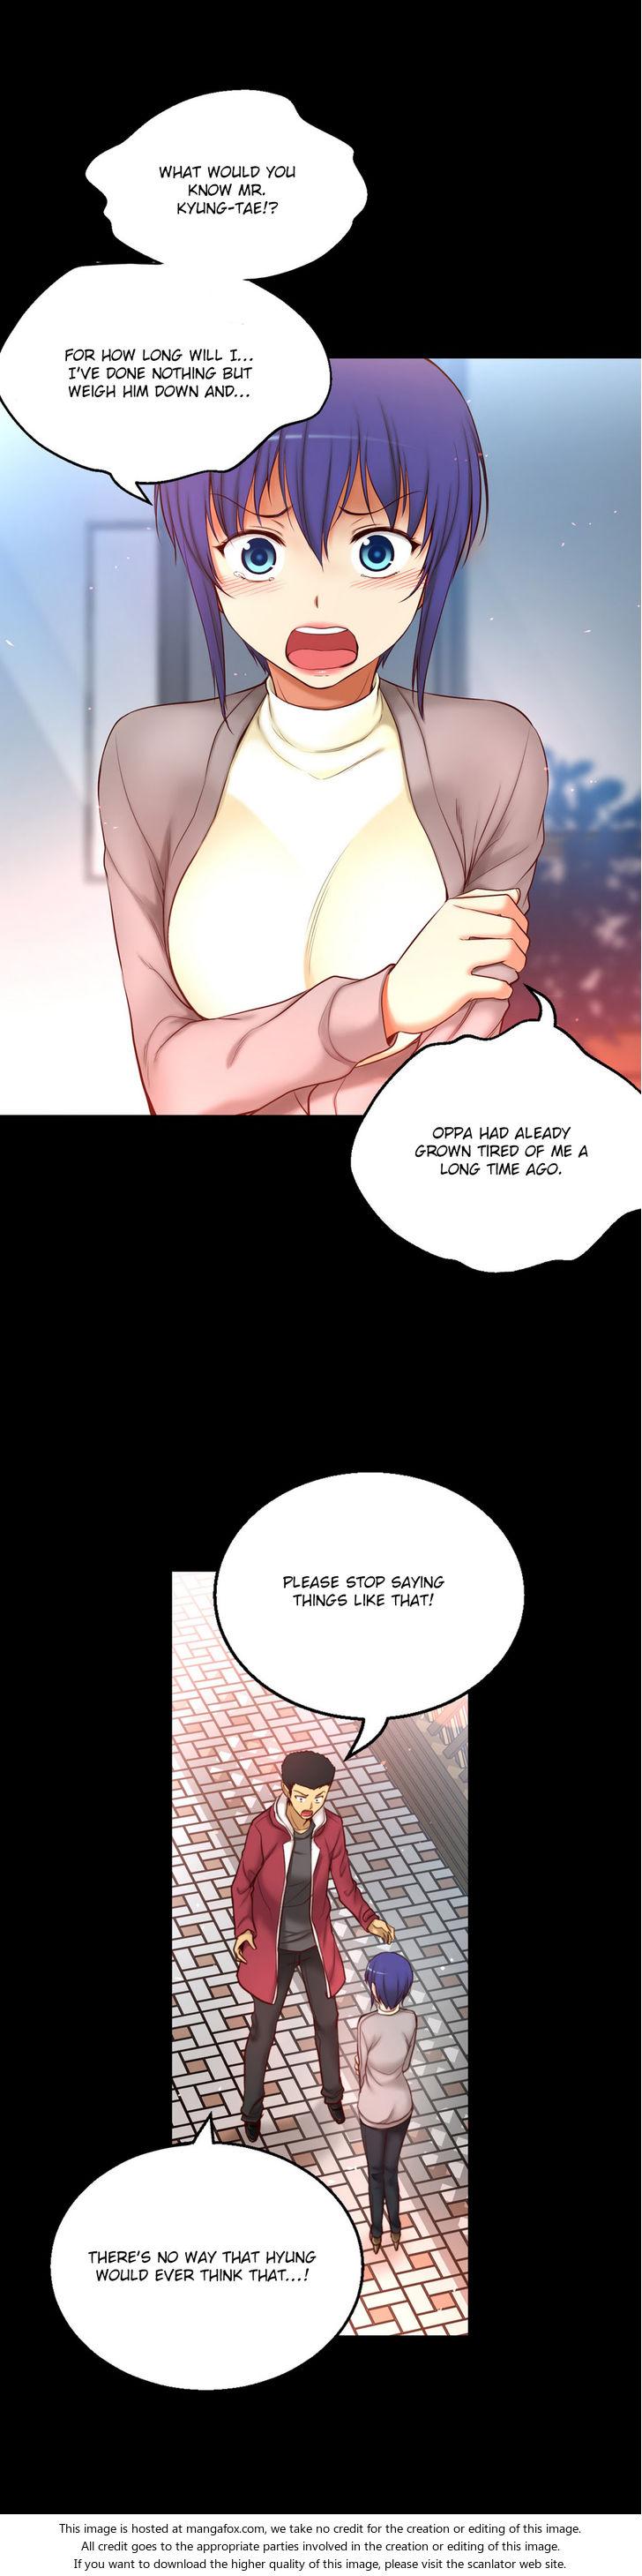 [Donggul Gom] She is Young (English) Part 1/2 1465